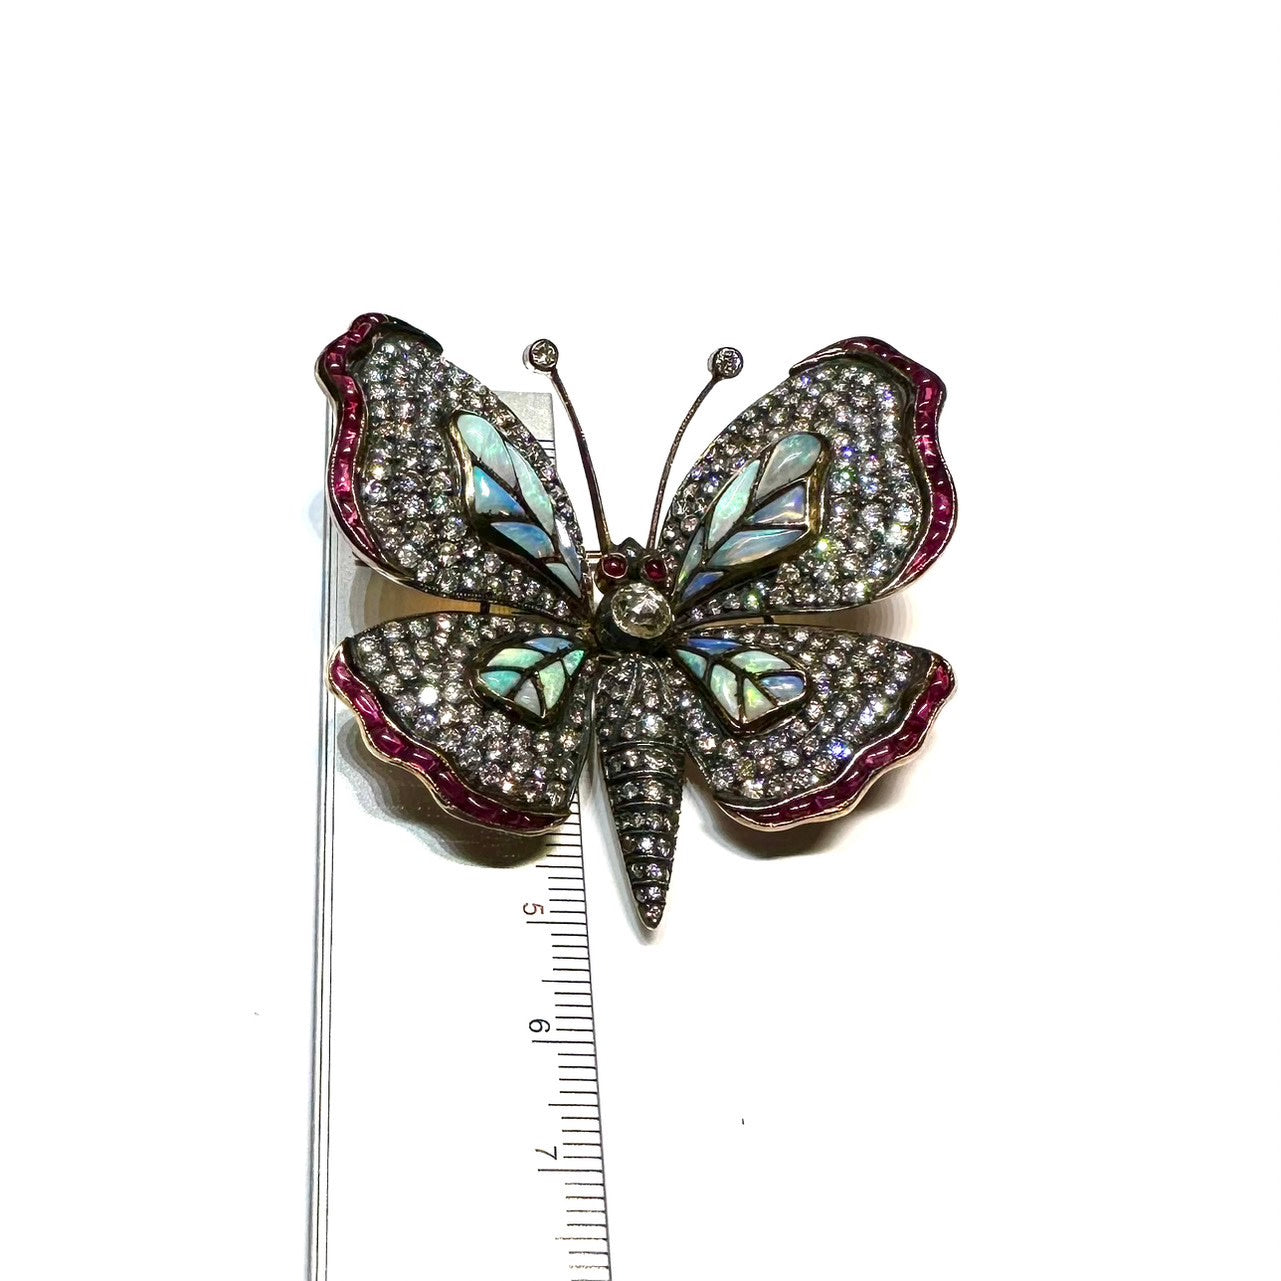 Post-1980s Silver & 18KT Yellow Gold Diamond, Opal & Ruby Butterfly Brooch with ruler for scale